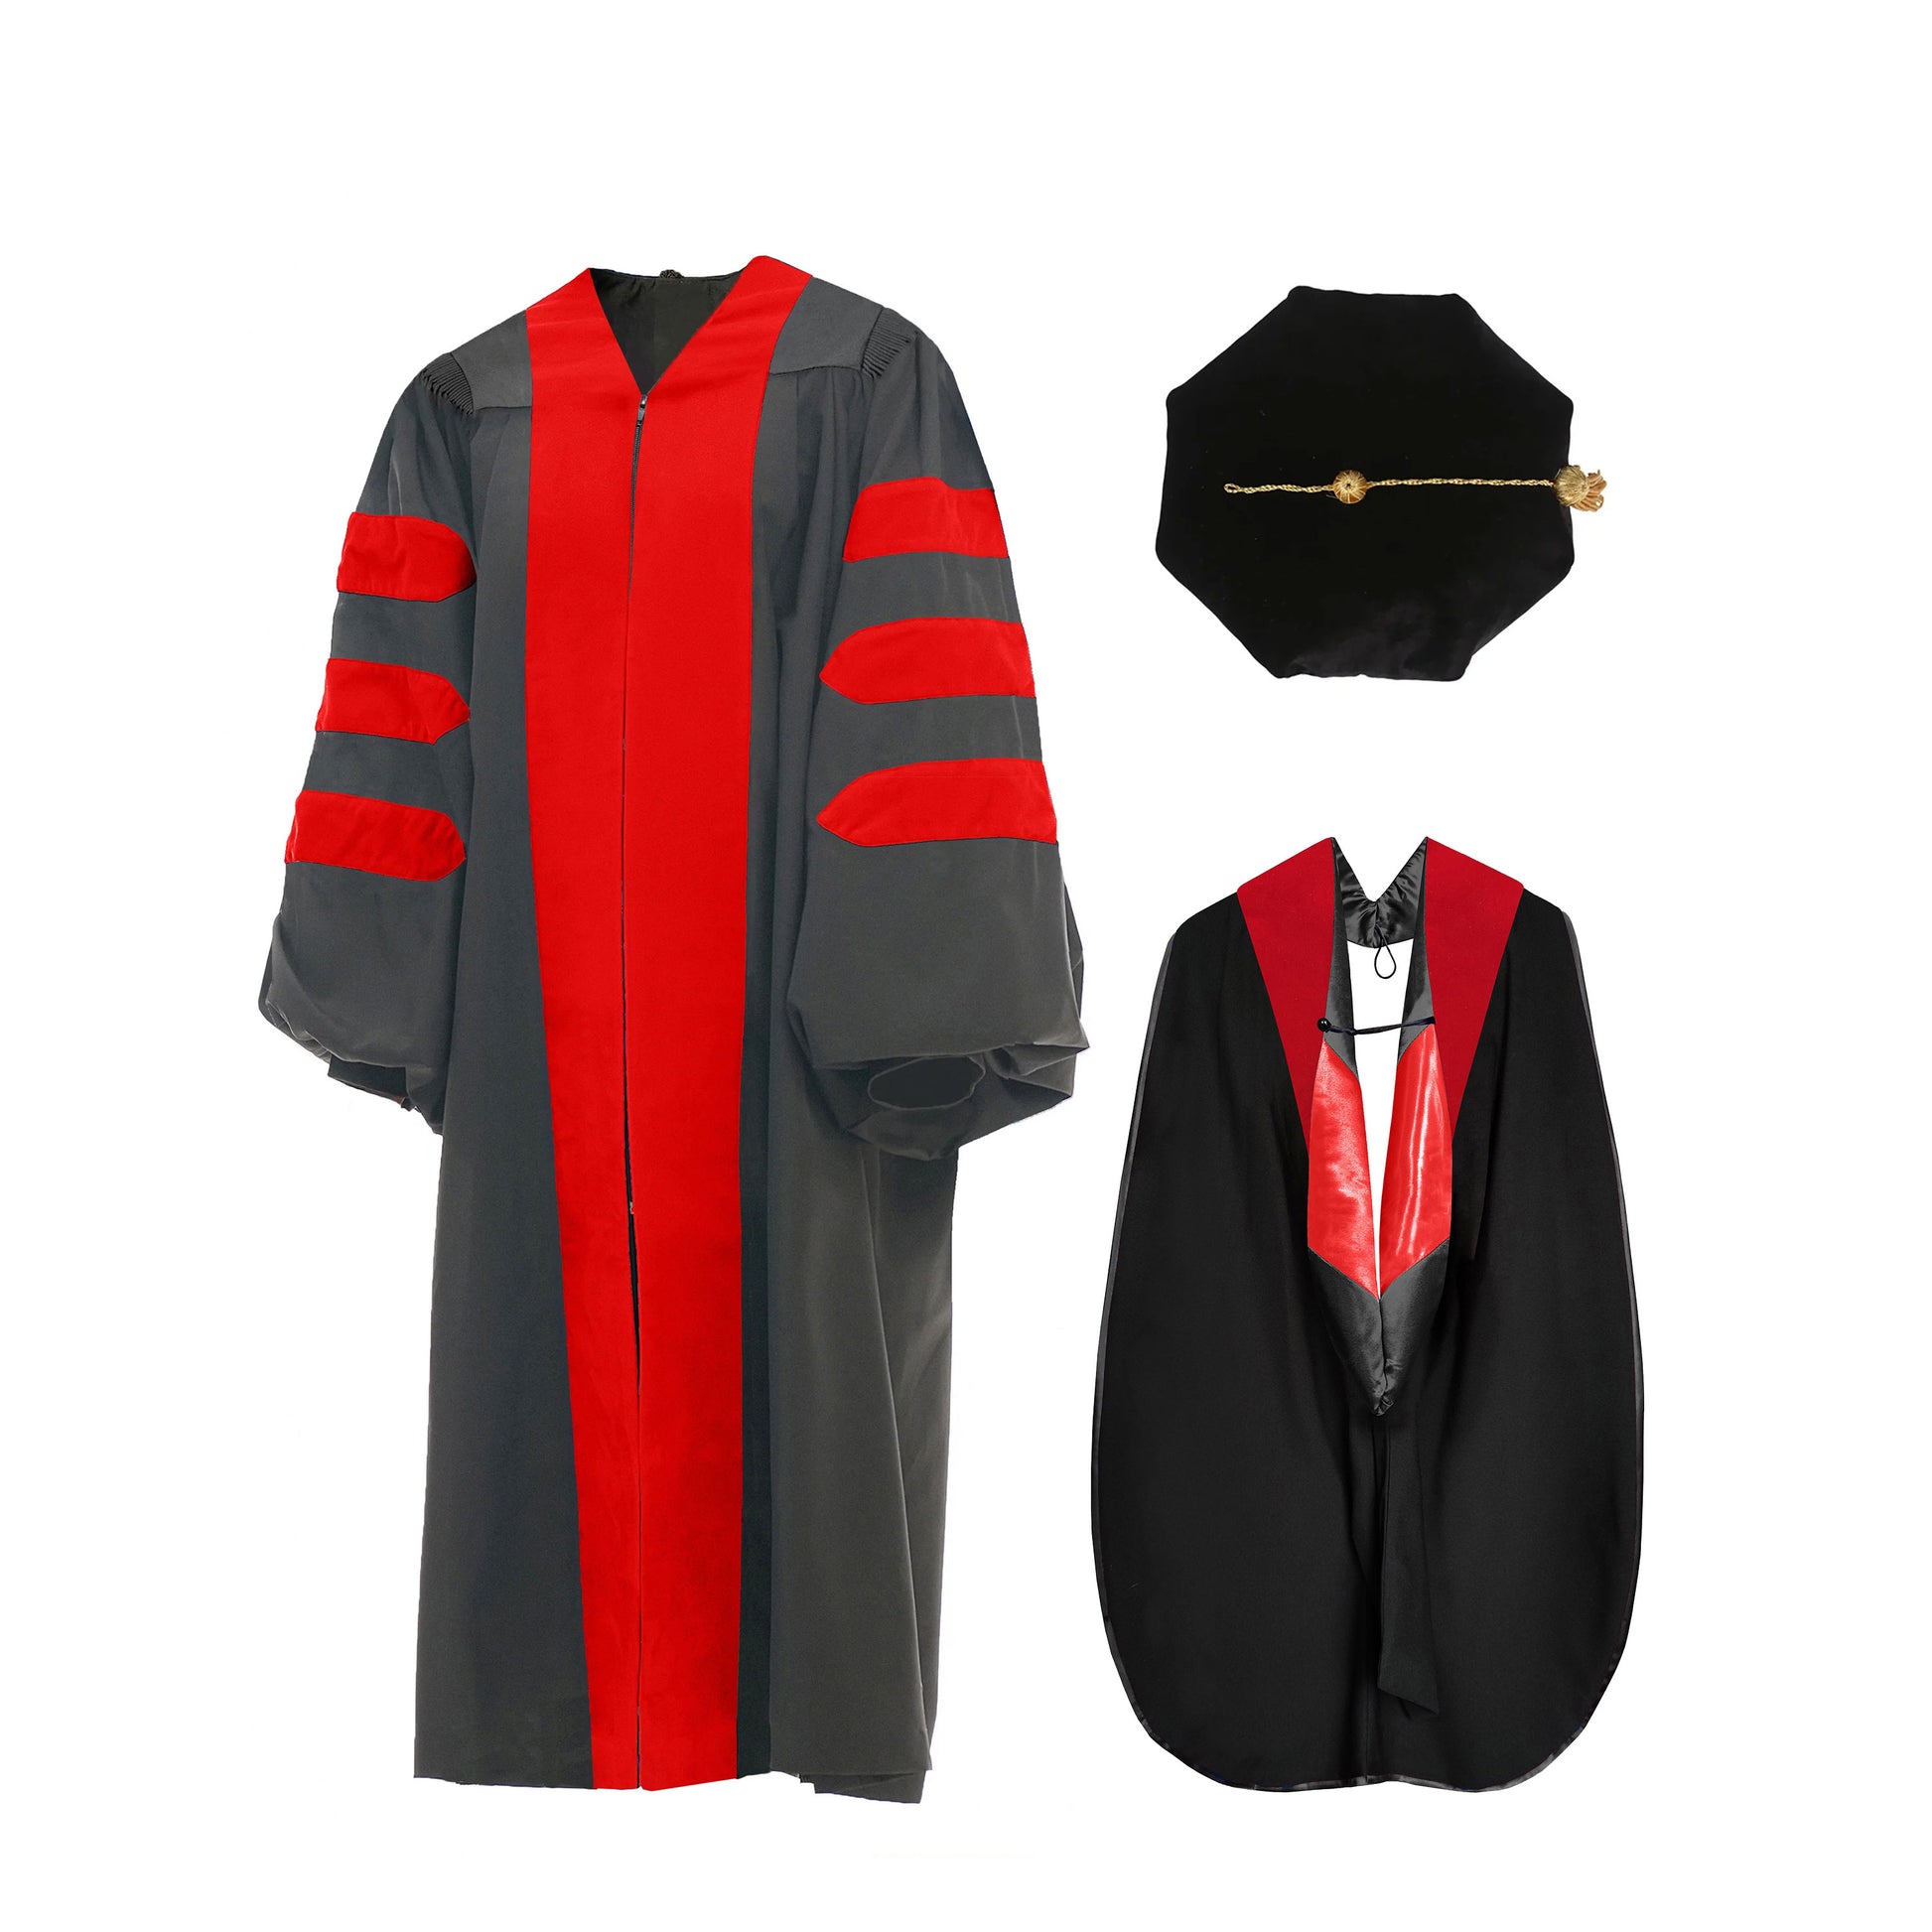 Deluxe Doctoral Robe and Hood